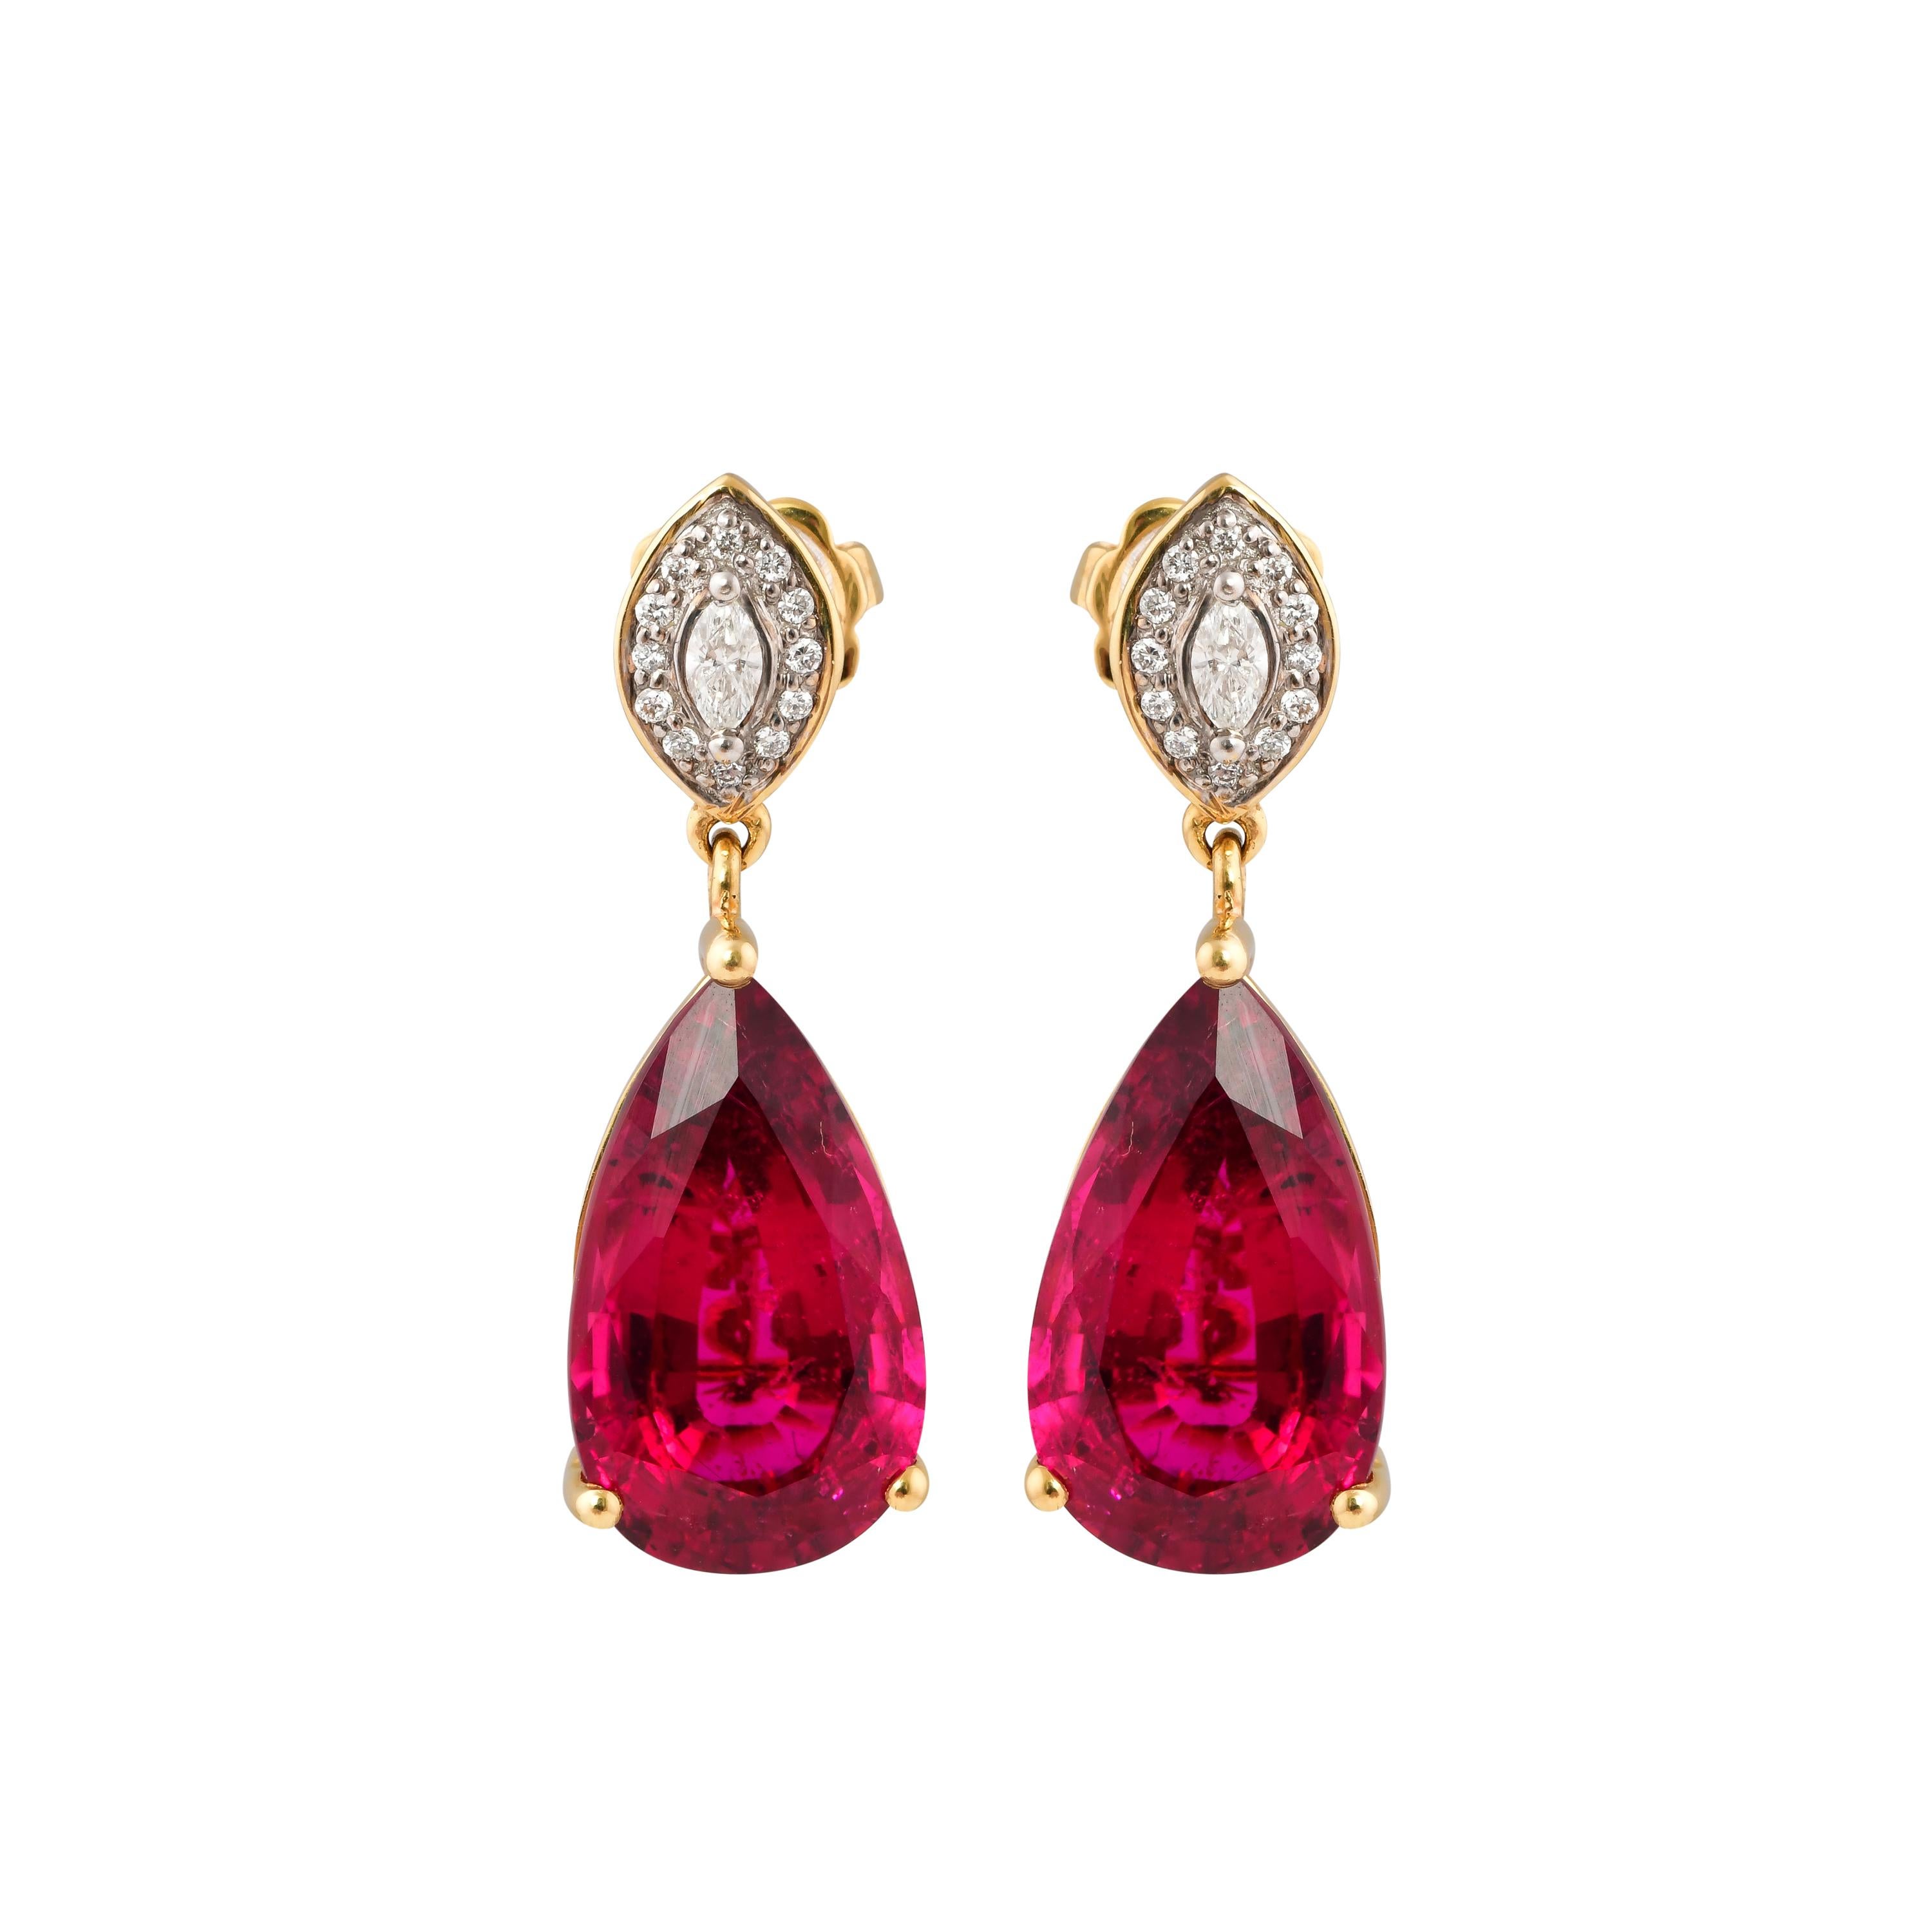 Contemporary 13.78 Carat Rubellite Tourmaline Earring with Diamond in 18 Karat Yellow Gold For Sale